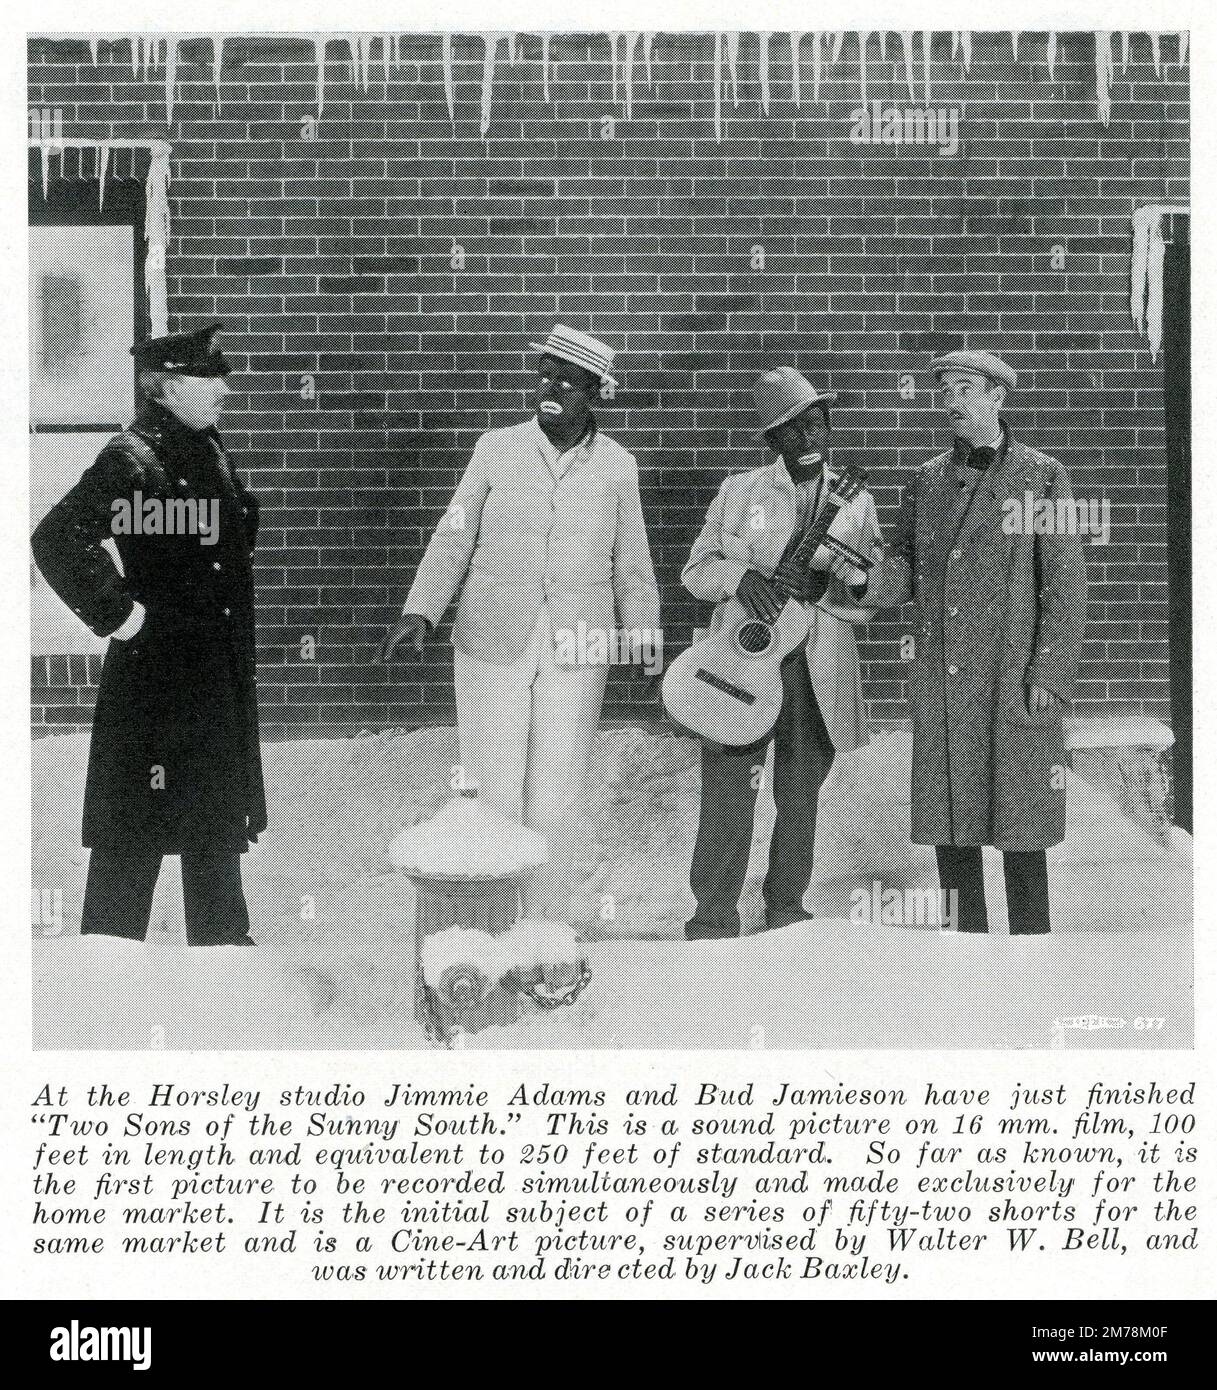 Advertisement  for comedians JIMMIE ADAMS and BUD JAMIESON in blackface in TWO SONS OF THE SUNNY SOUTH 1931 director / writer JACK BAXLEY supervised by Walter W. Bell for Cine-Art Pictures a 16mm Sound Film produced at the Horsley Studio in Los Angeles exclusively for the home movie market - from the March 1931 edition of the magazine THE INTERNATIONAL PHOTOGRAPHER (HOLLYWOOD) Volume 3 Number 2 Stock Photo